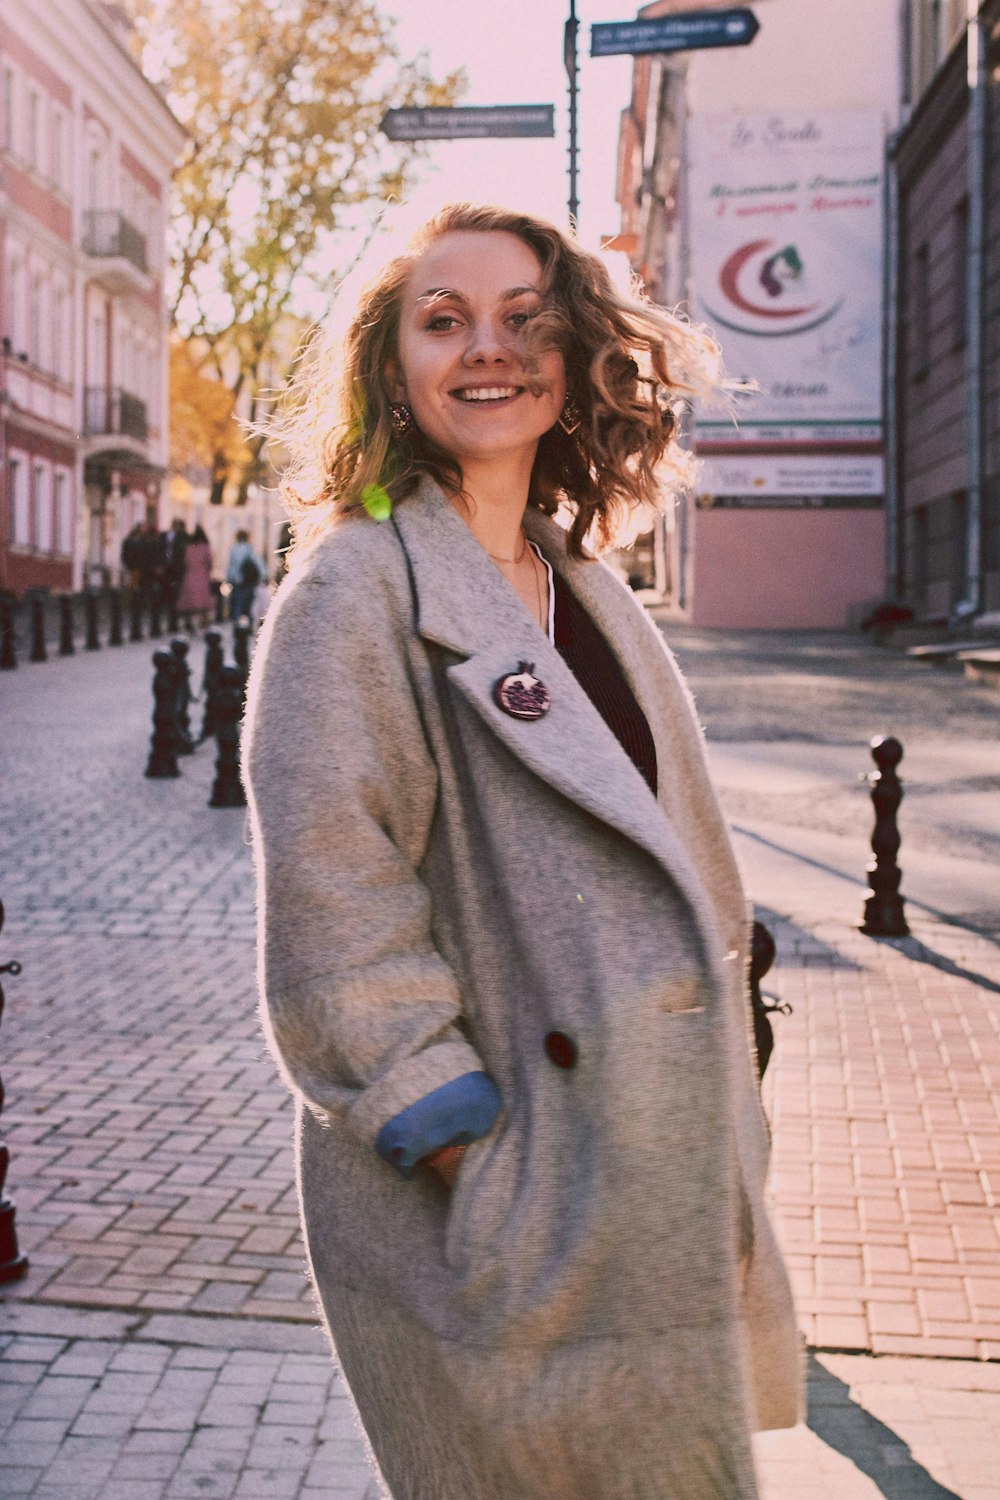 woman with hands in her overcoat smiling and standing near buildings during day